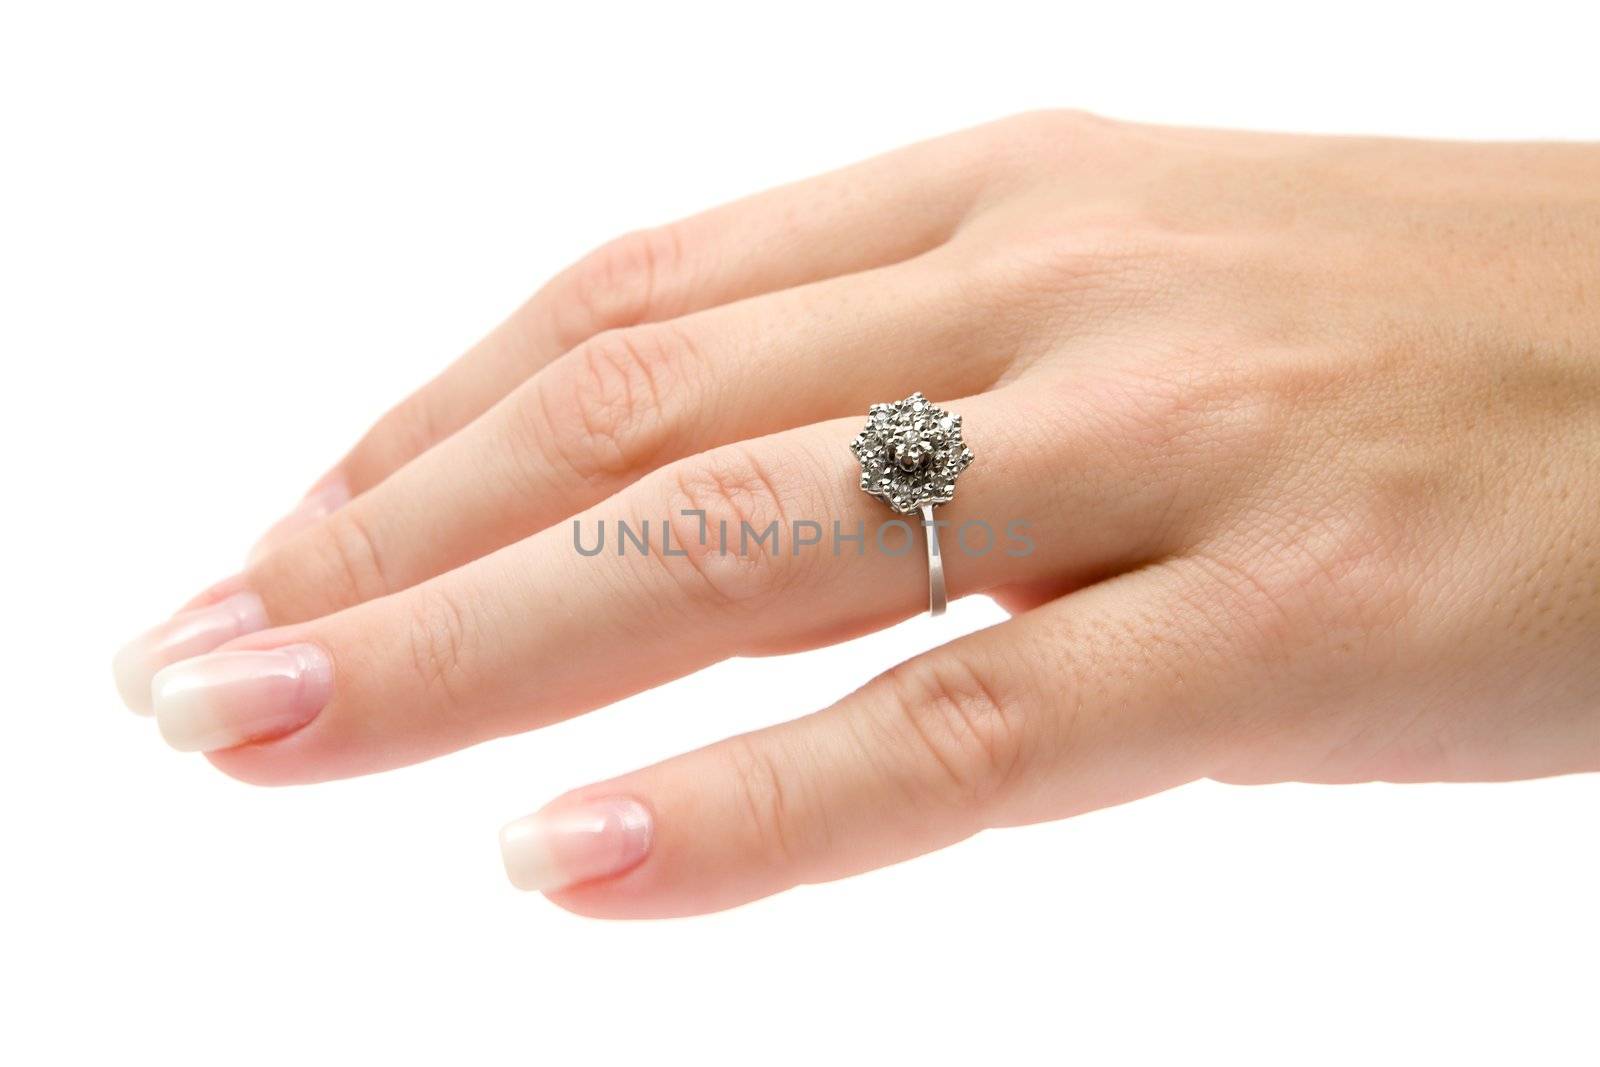 Wearing a precious diamond ring. Isolated on a white background.